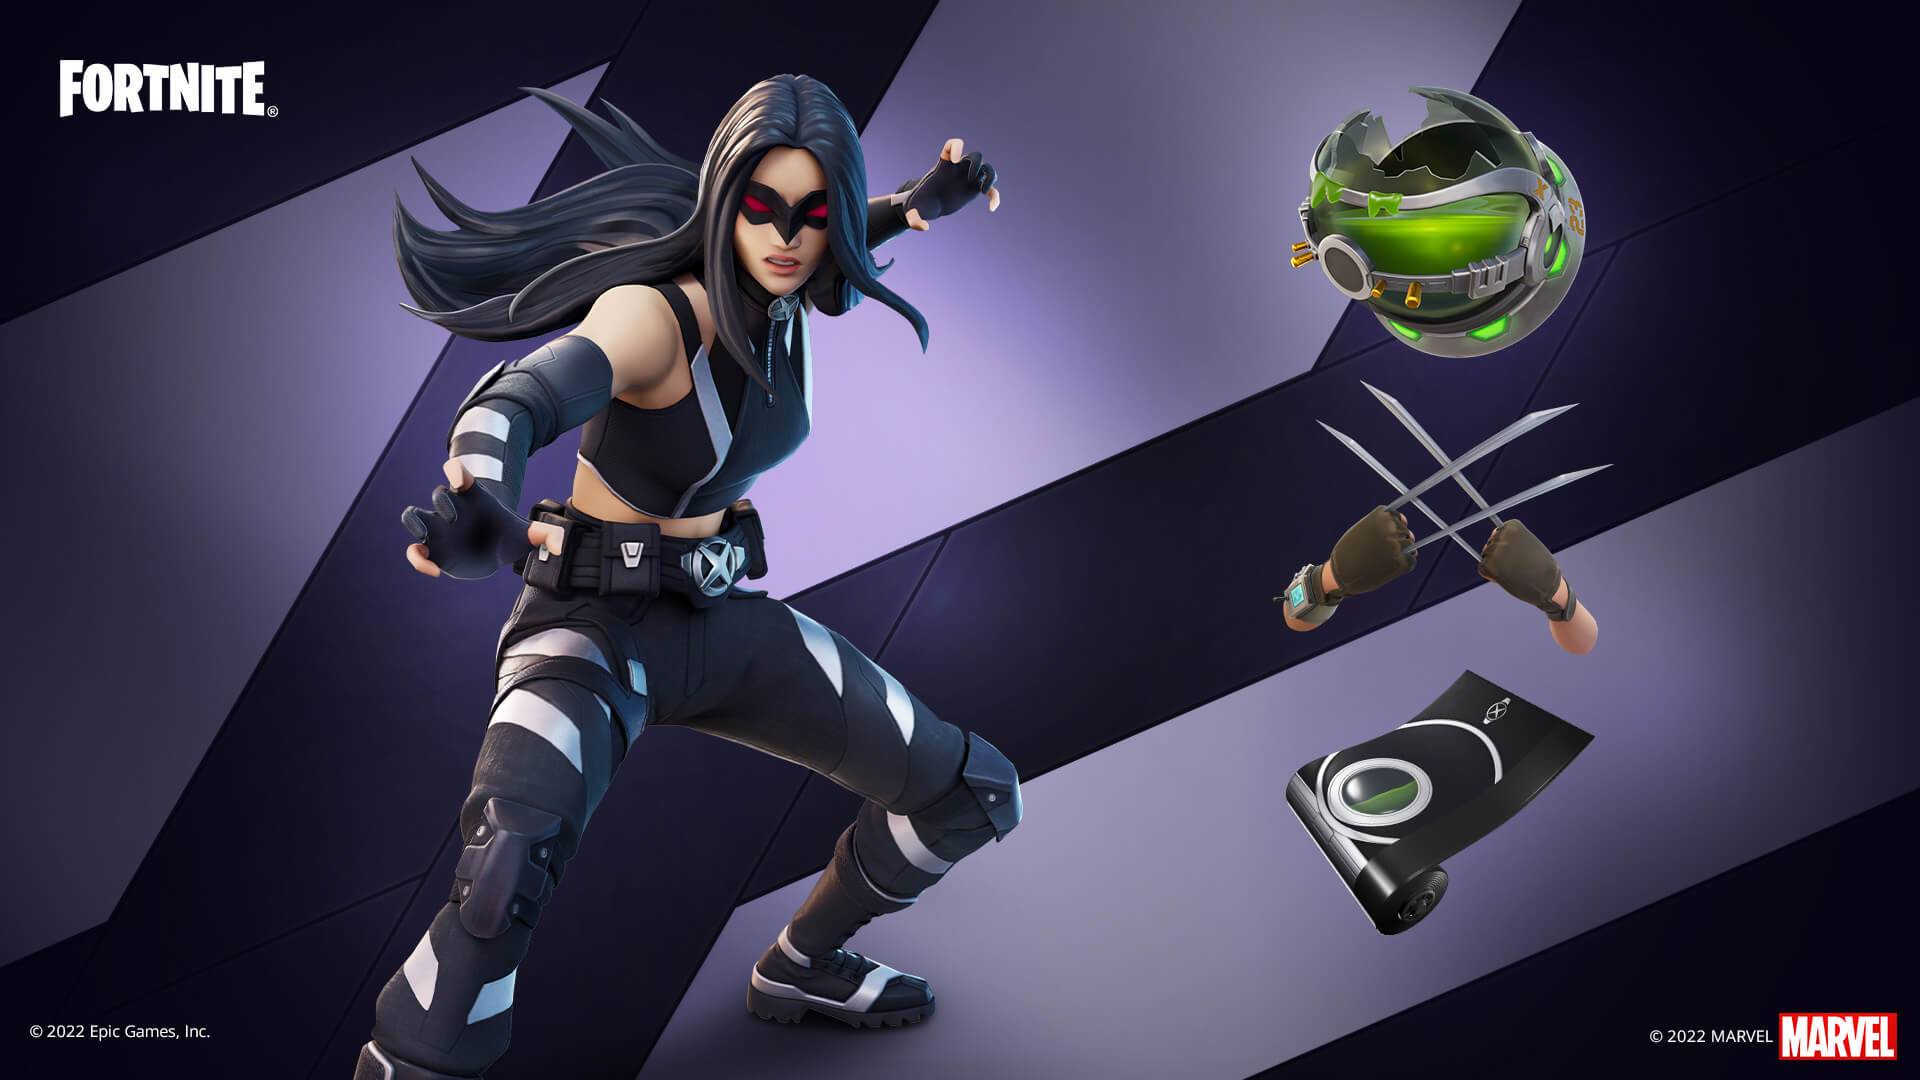 Fortnite Surprises The Fans With Brand New Skins – Laura Kinney’s X-23 & Doctor Who